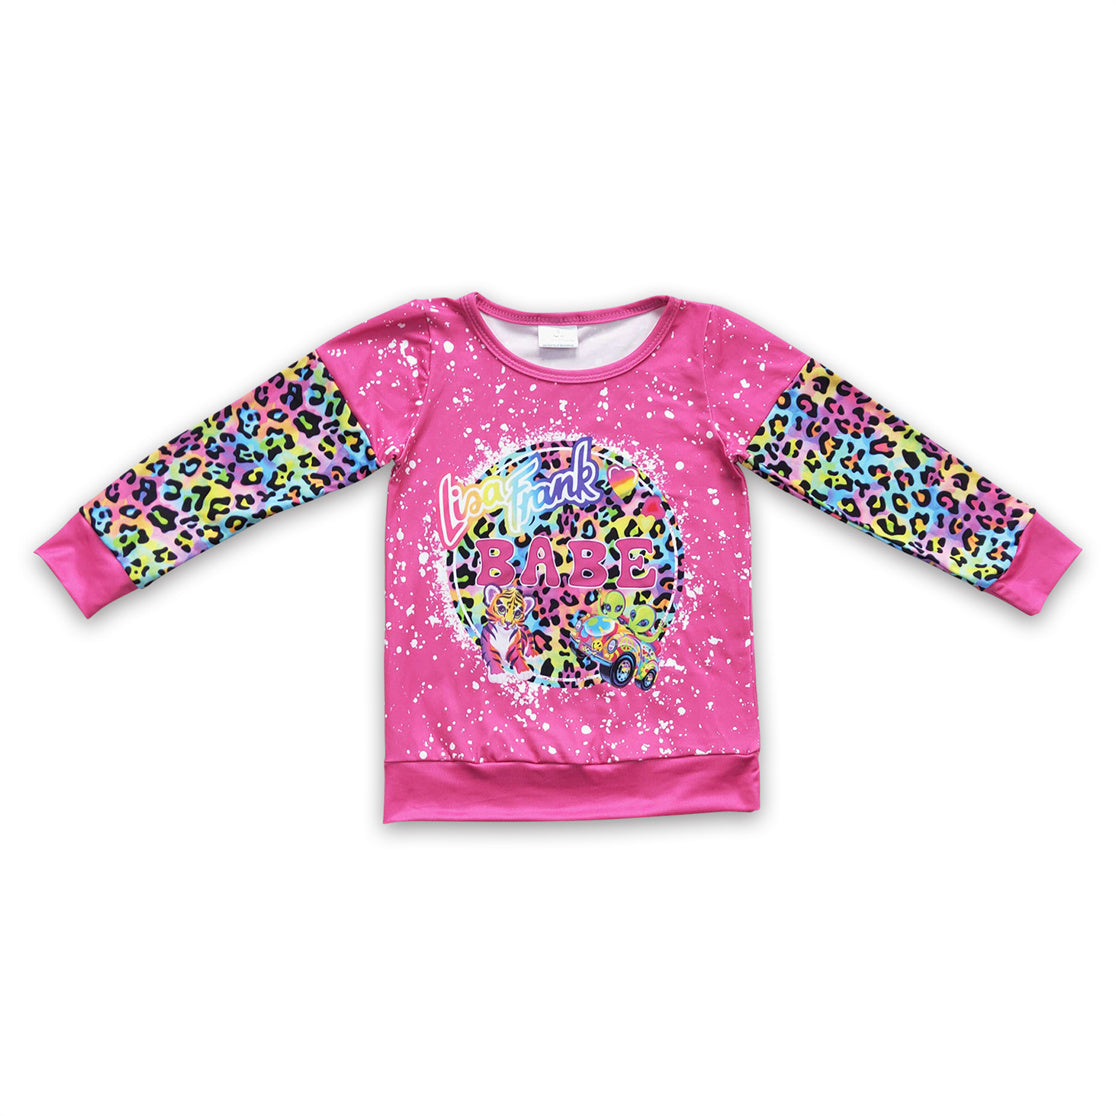 GT0085 baby girl clothes winter shirt